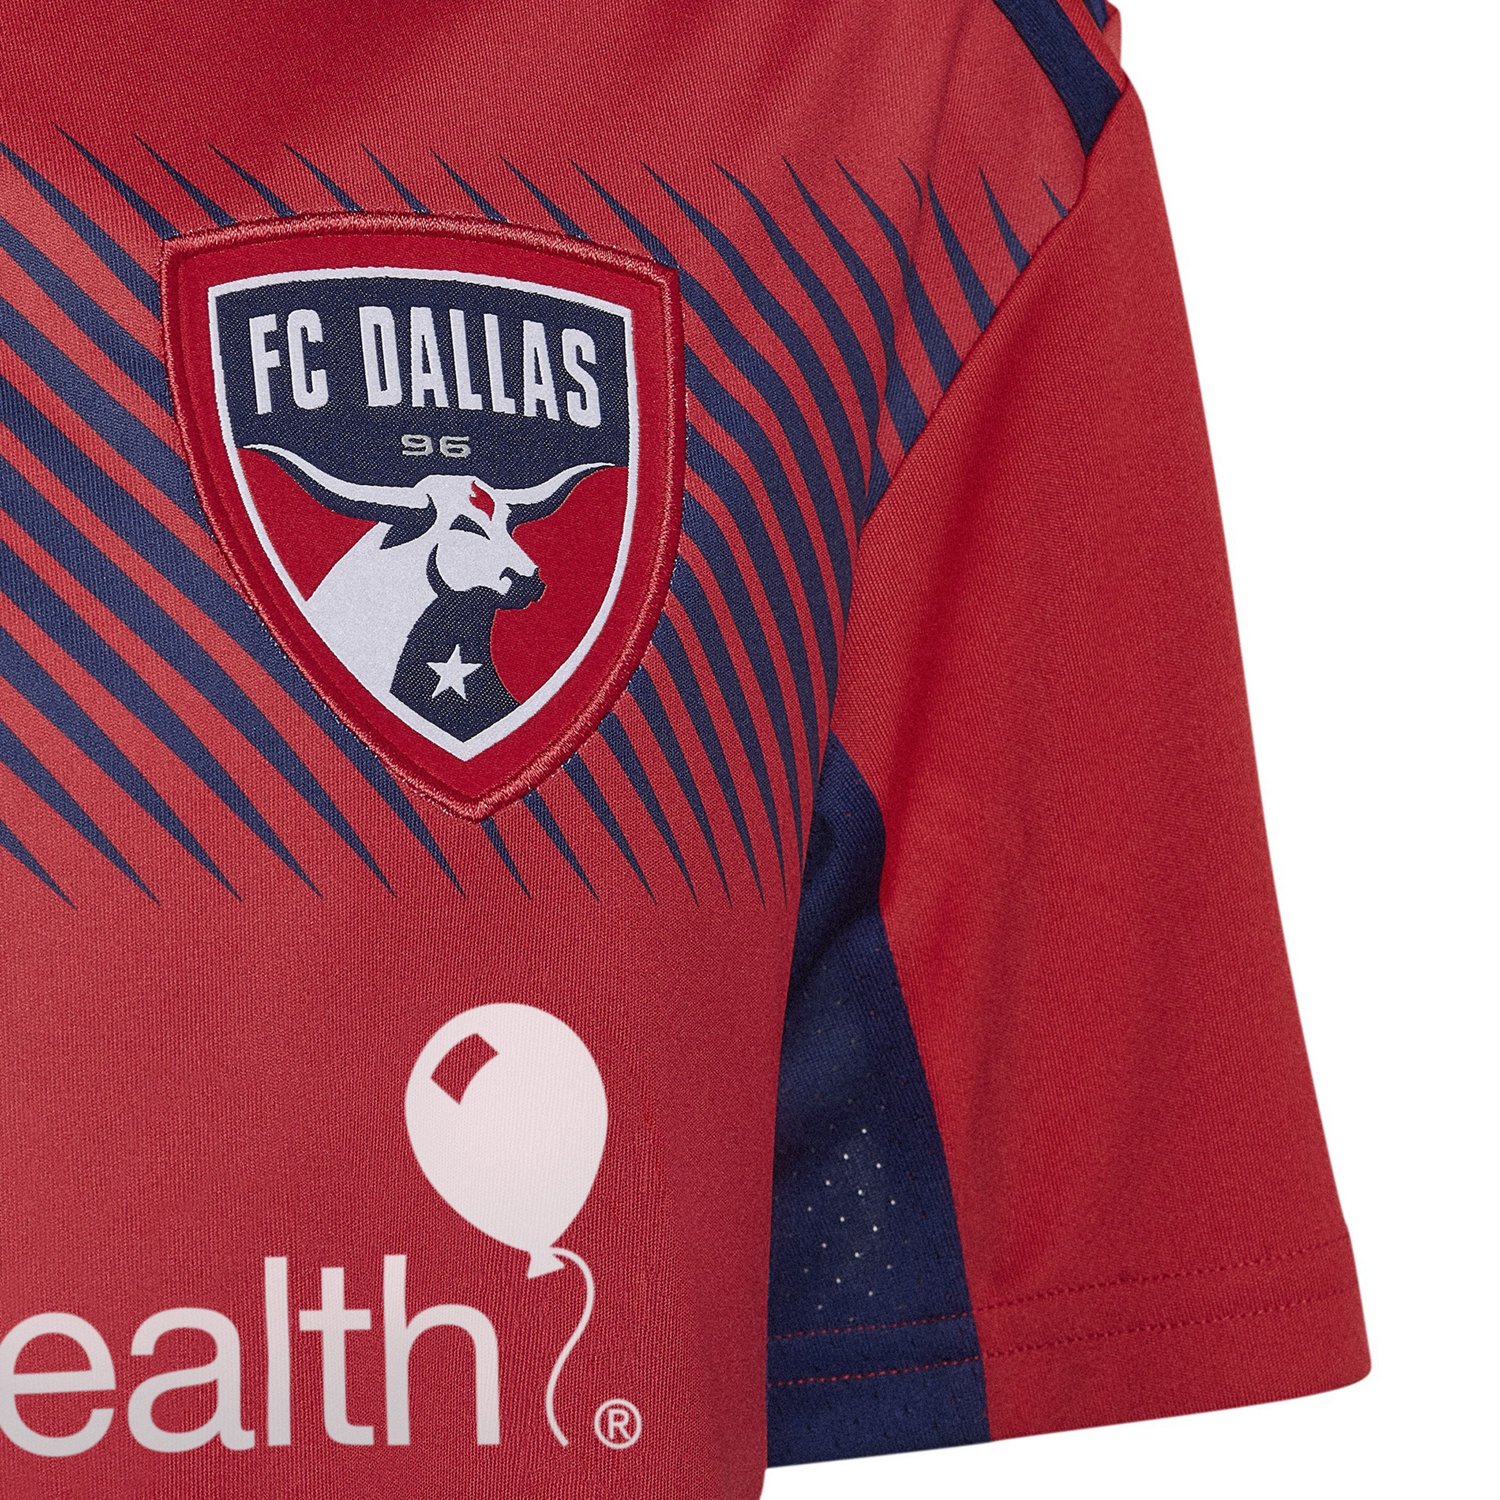 FC Dallas Authentic Away Jersey Adidas Soccer Youth/boys.